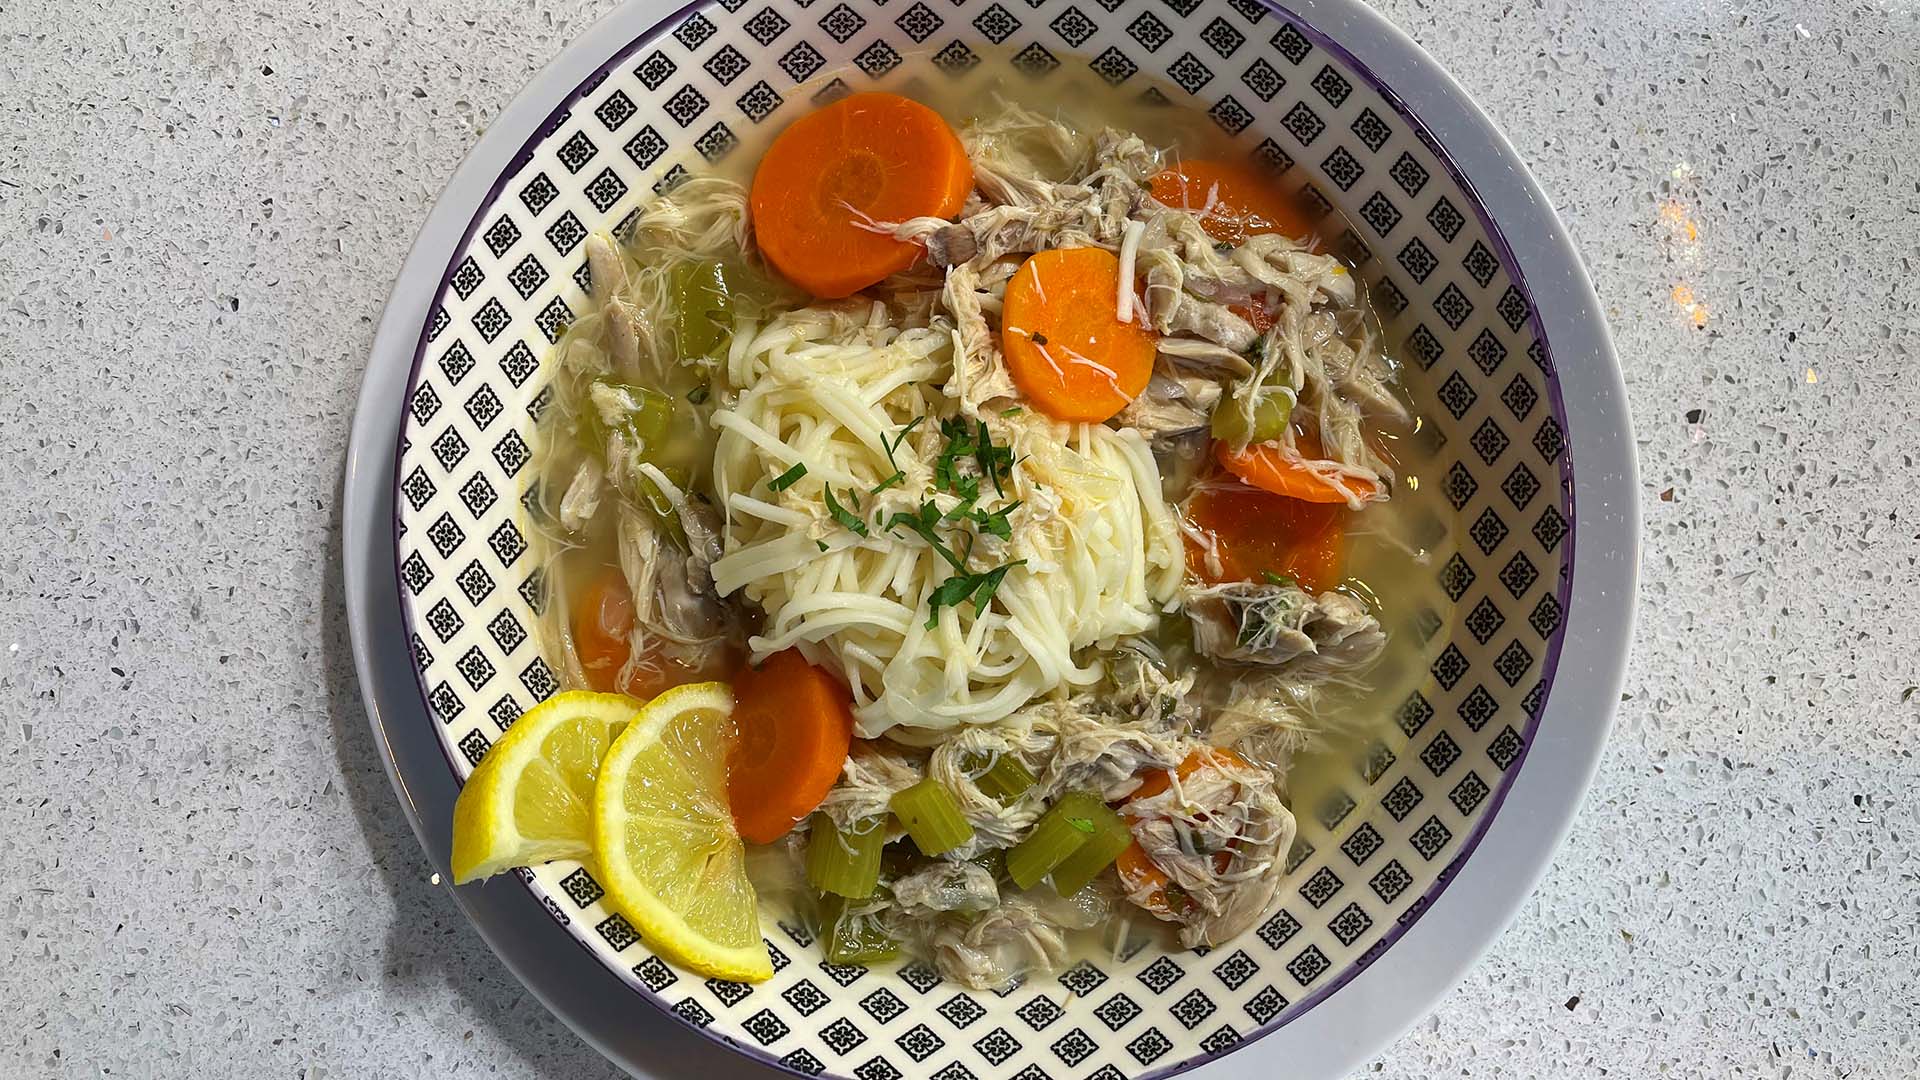 Nine satisfying chicken soup recipes to warm you up from the inside